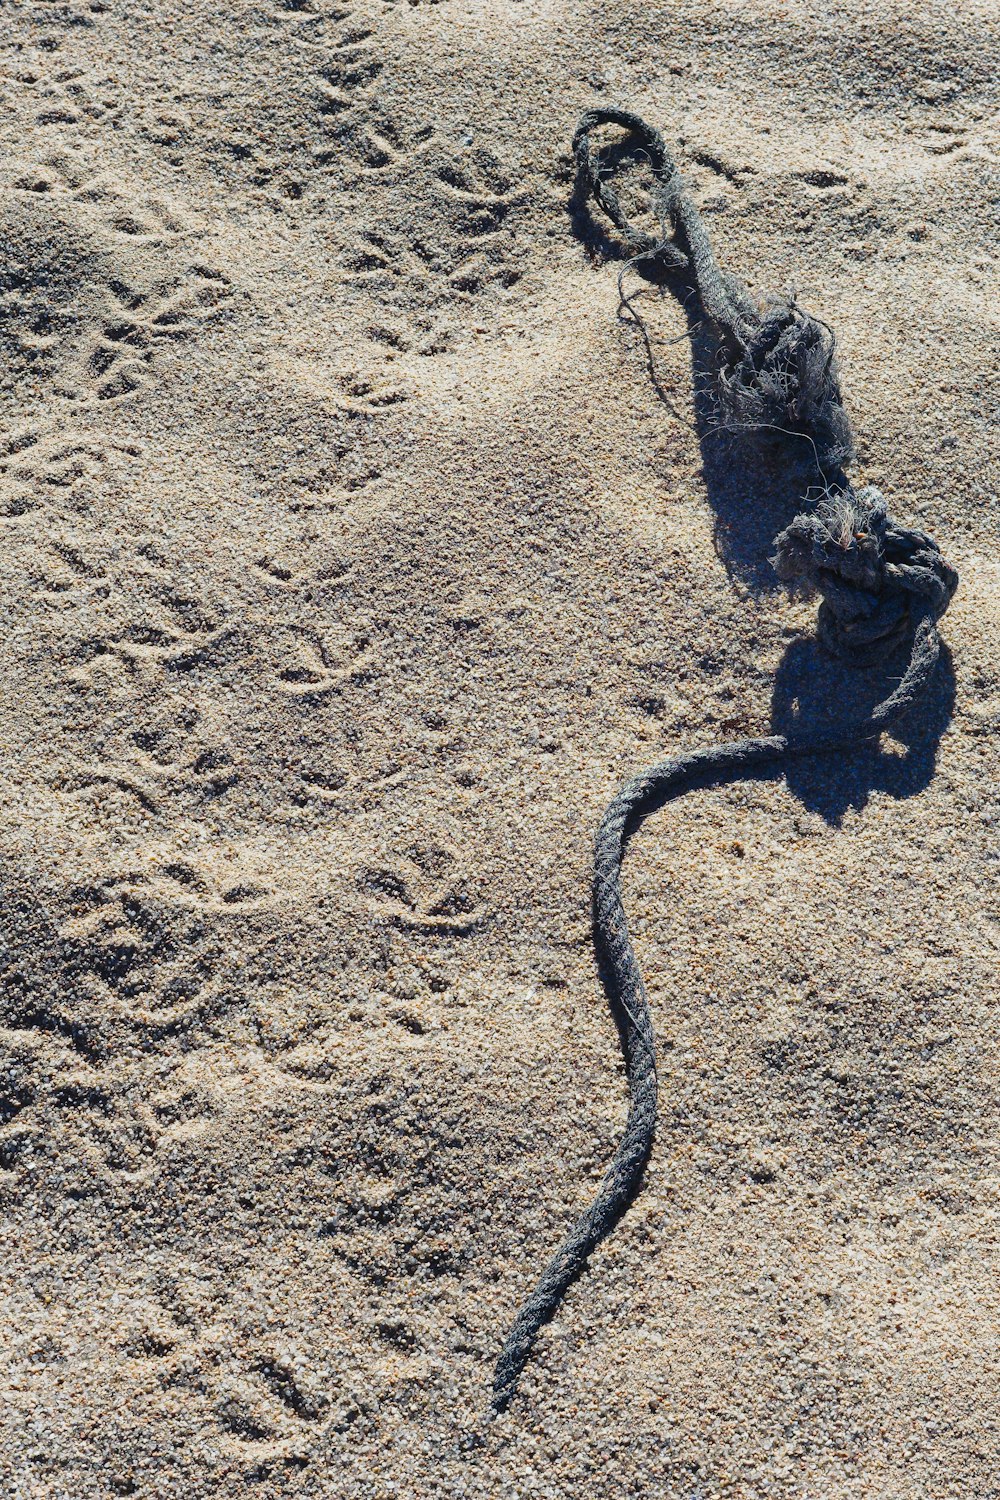 a snake in the sand on a beach